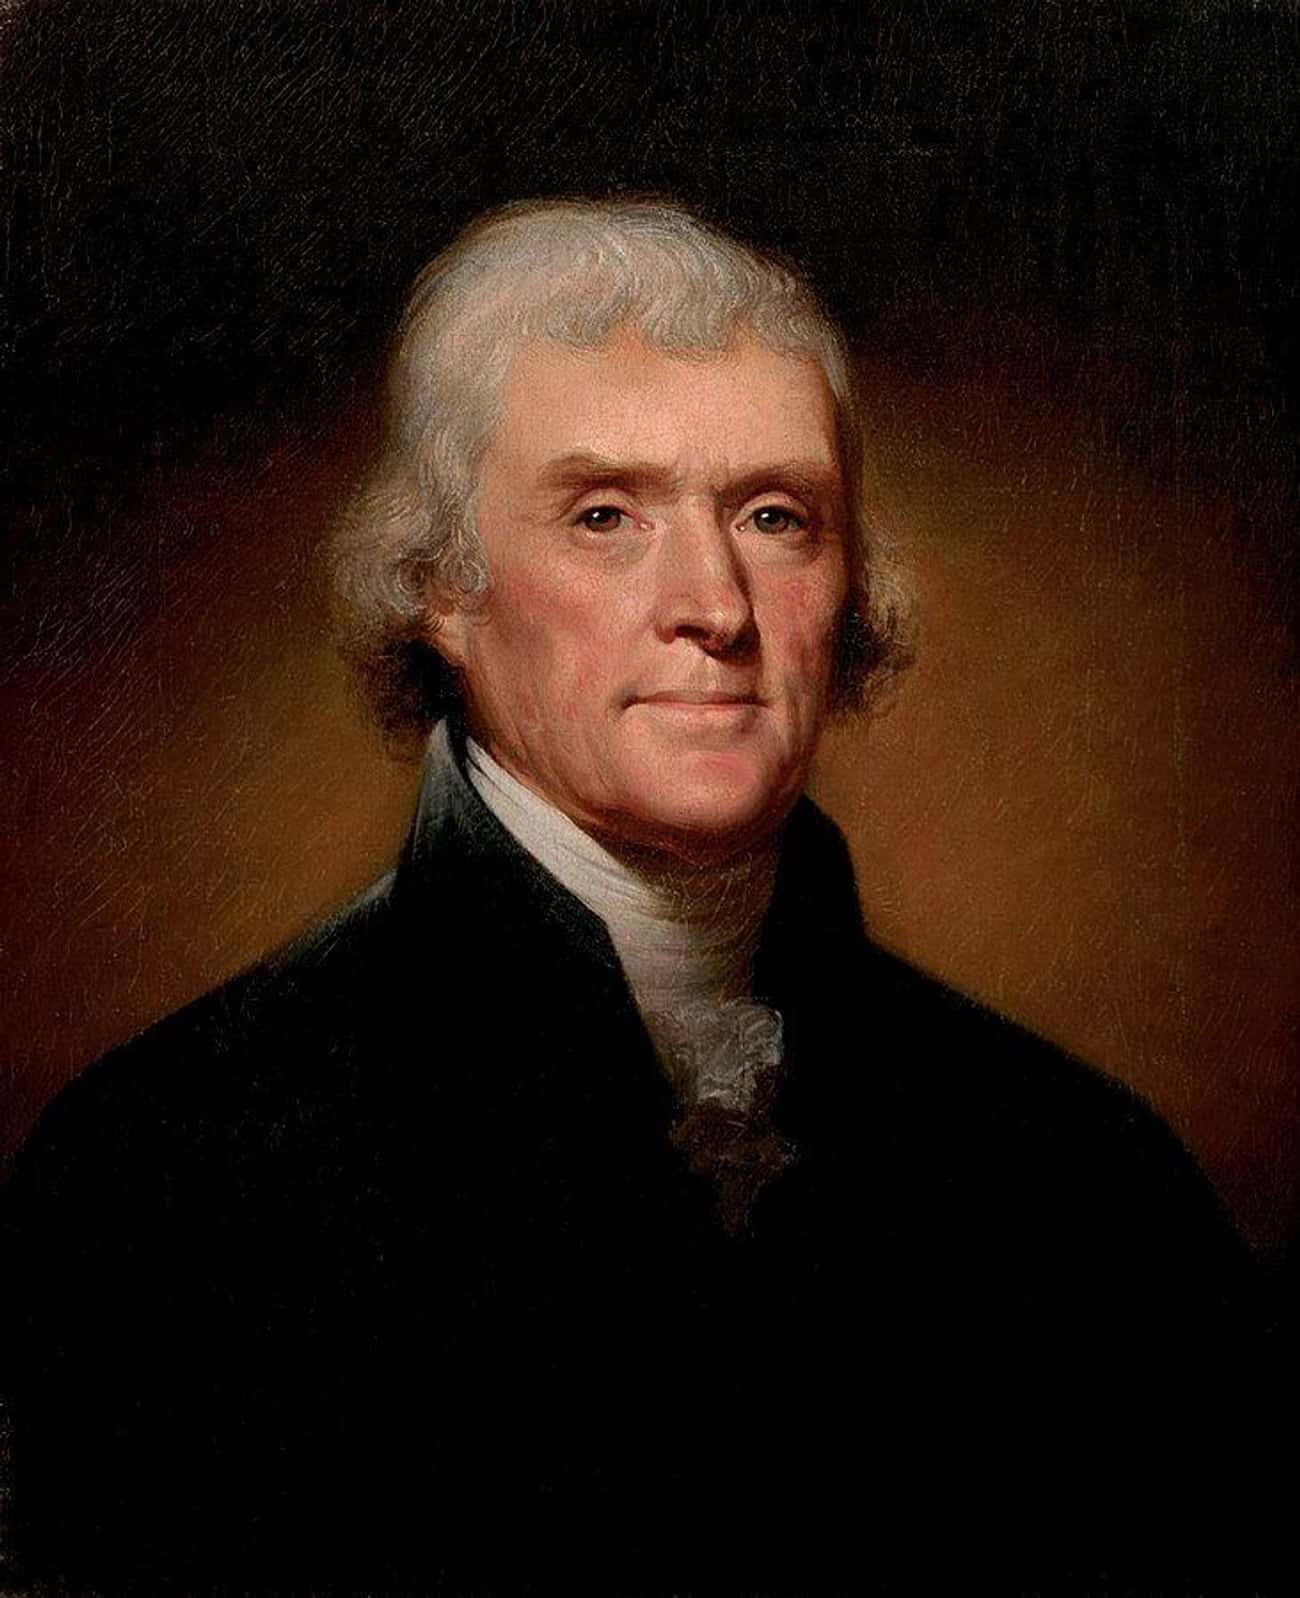 Jefferson's First Inaugural